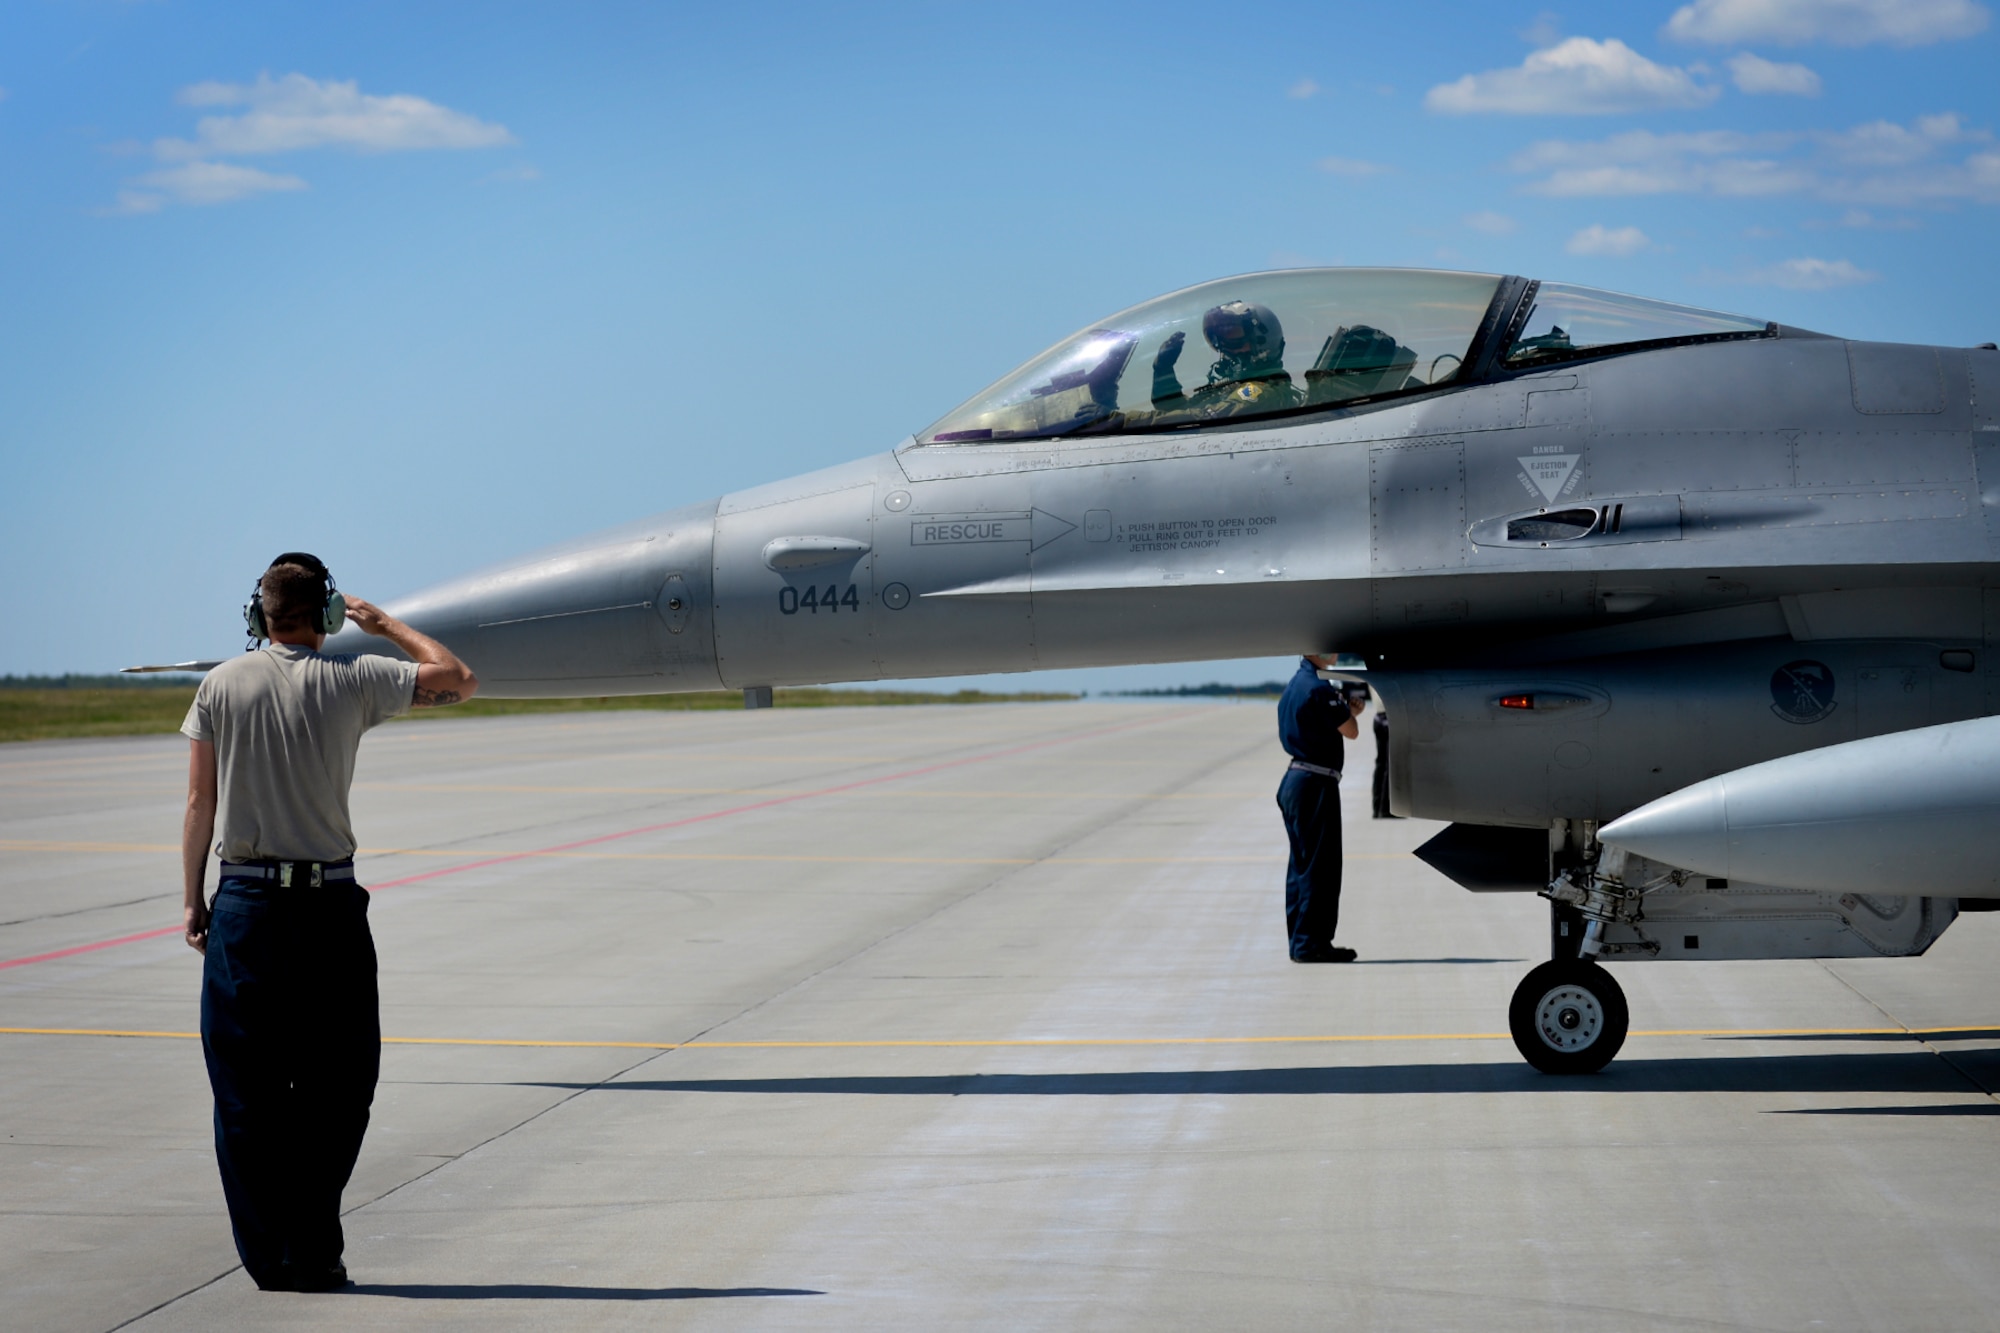 An Airman from the 31st Aircraft Maintenance Squadron finishes marshalling an F-16 Fighting Falcon from the 31st Fighter Wing, Aviano Air Base, Italy, to the taxi way for a sortie during Aviation Detachment Rotation 16-3 at Lask Air Base, Poland, June 7, 2016. While in Poland as part of regular quarterly training for AvDet Rotation 16-3, the participating units will also support exercises Baltic Operations 2016, Saber Strike 2016, Swift Response 2016 and Anakonda 2016, which will be occurring concurrently. (U.S. Air Force photo/Senior Airman Erin Babis)